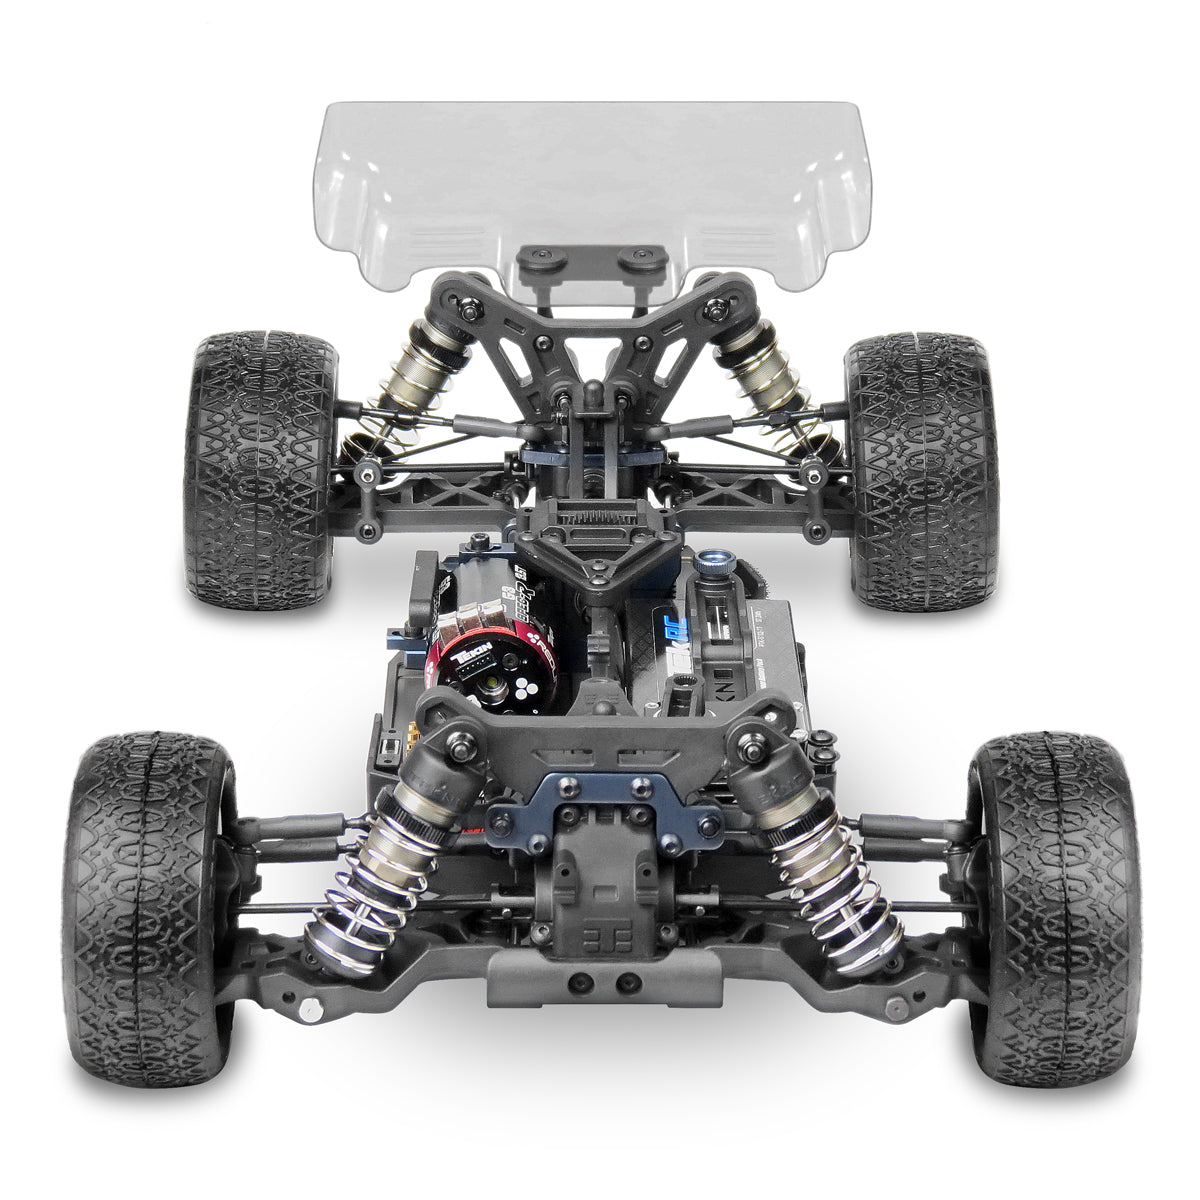 TKR6500 – EB410 1/10th 4WD Competition Electric Buggy Kit - RACERC